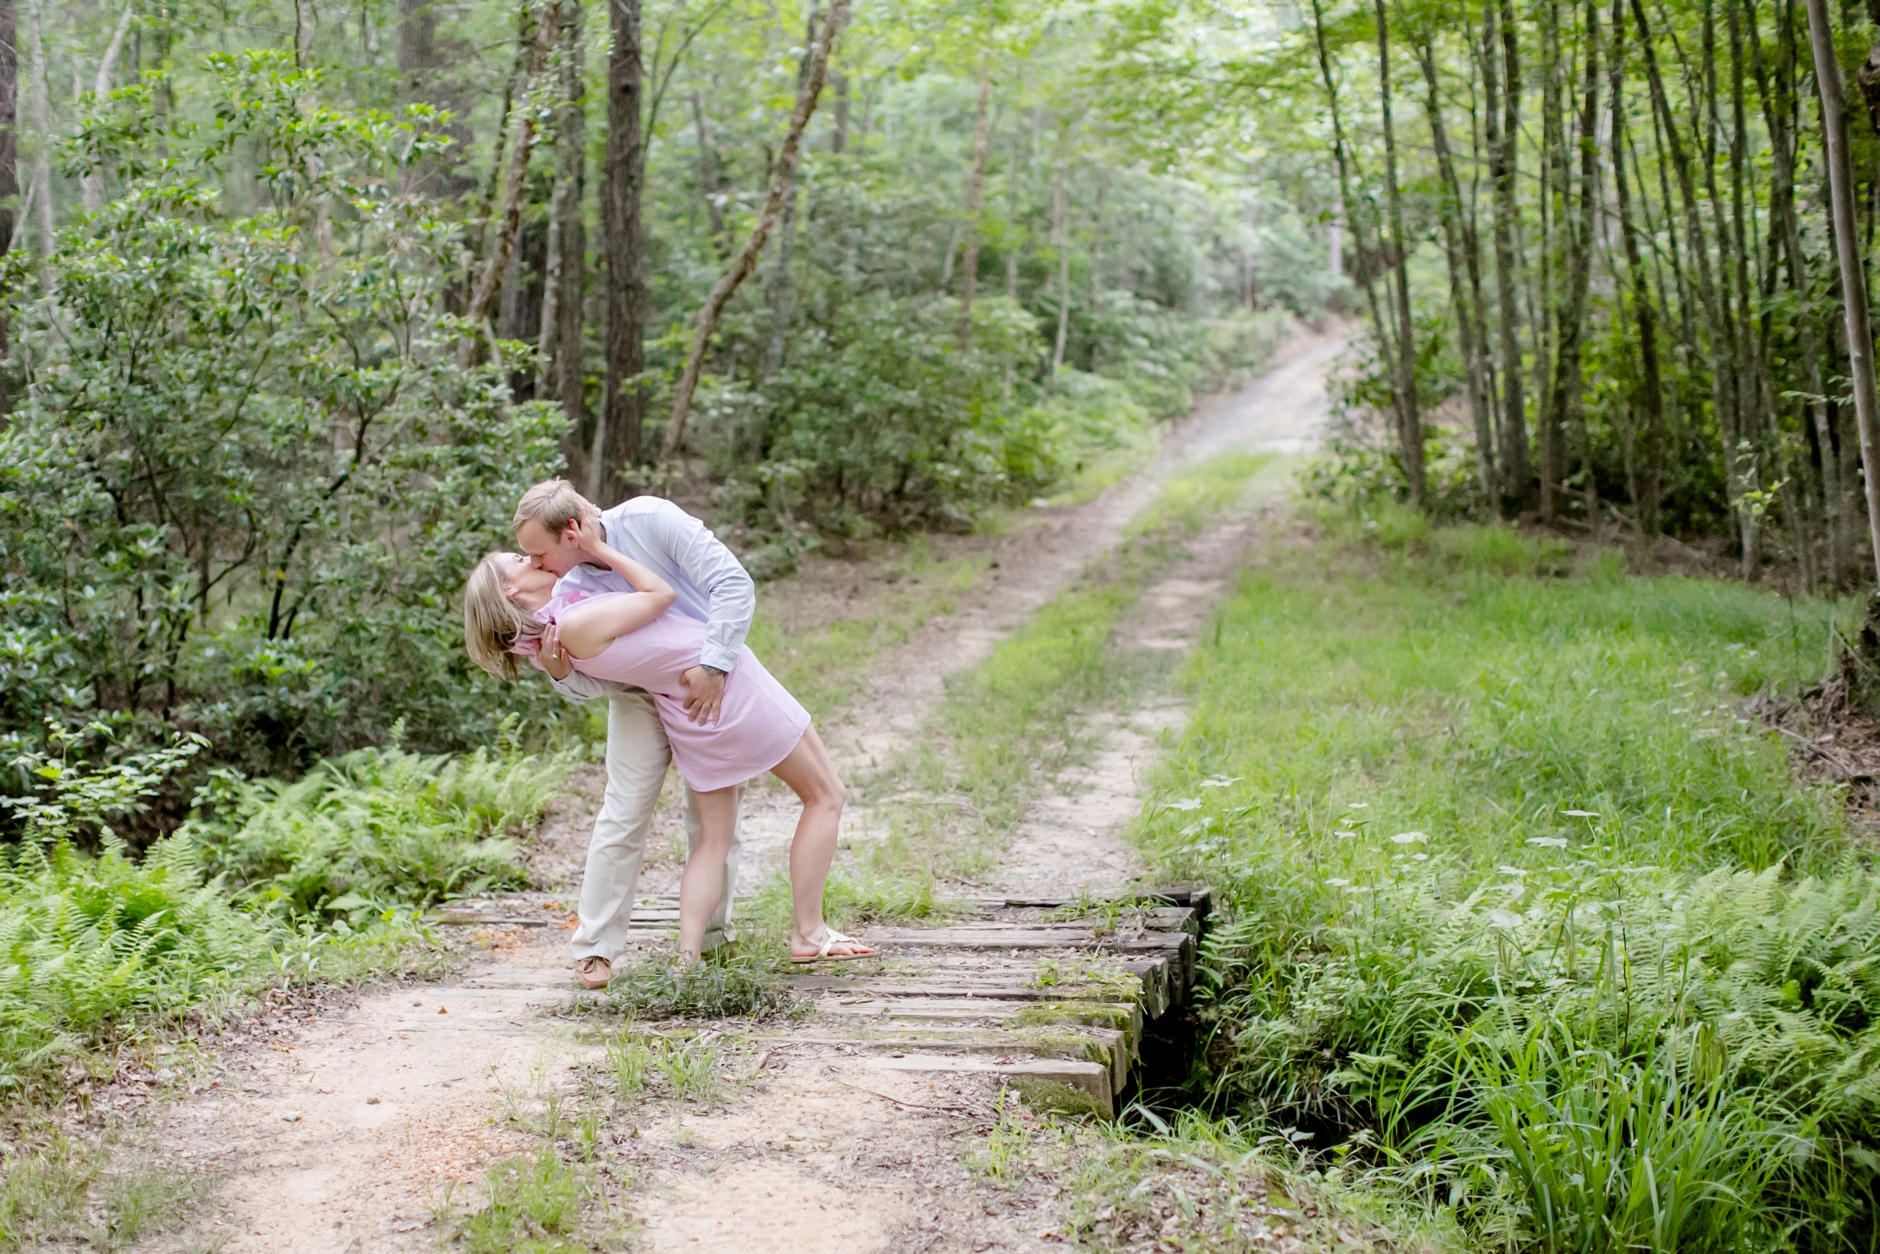 32A-King-George-Virginia-Engagement-1065